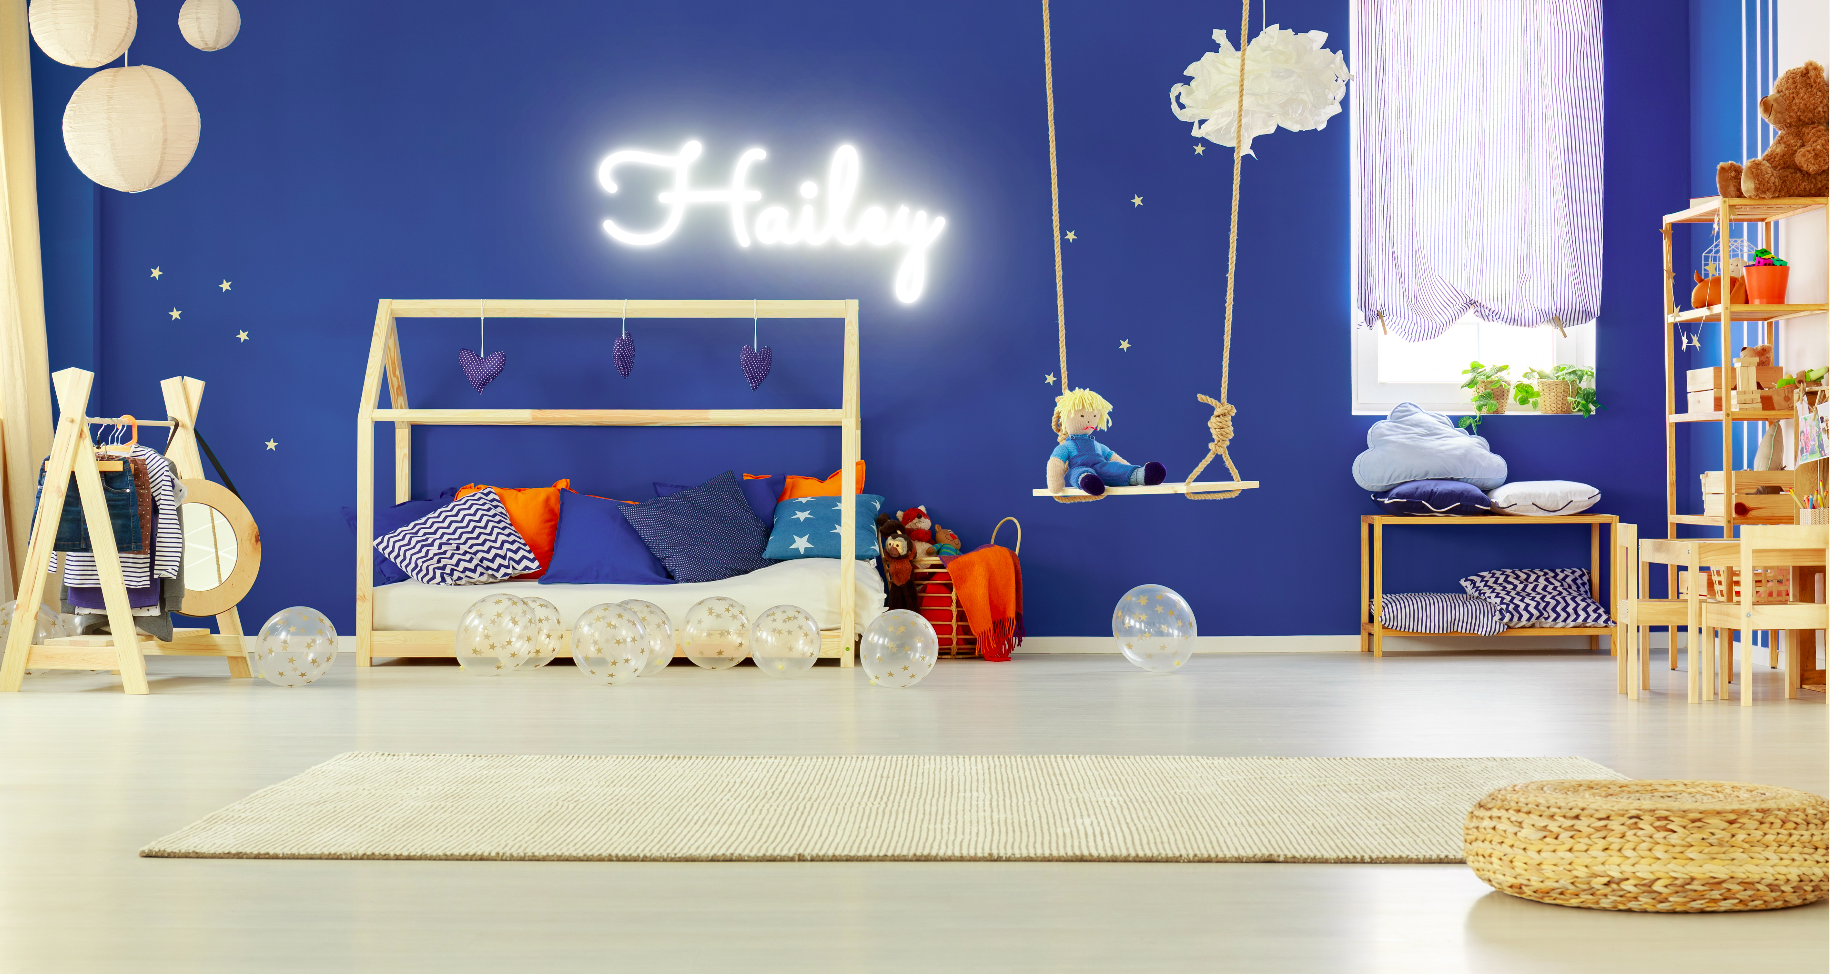 "Hailey" Baby Name LED Neon Sign